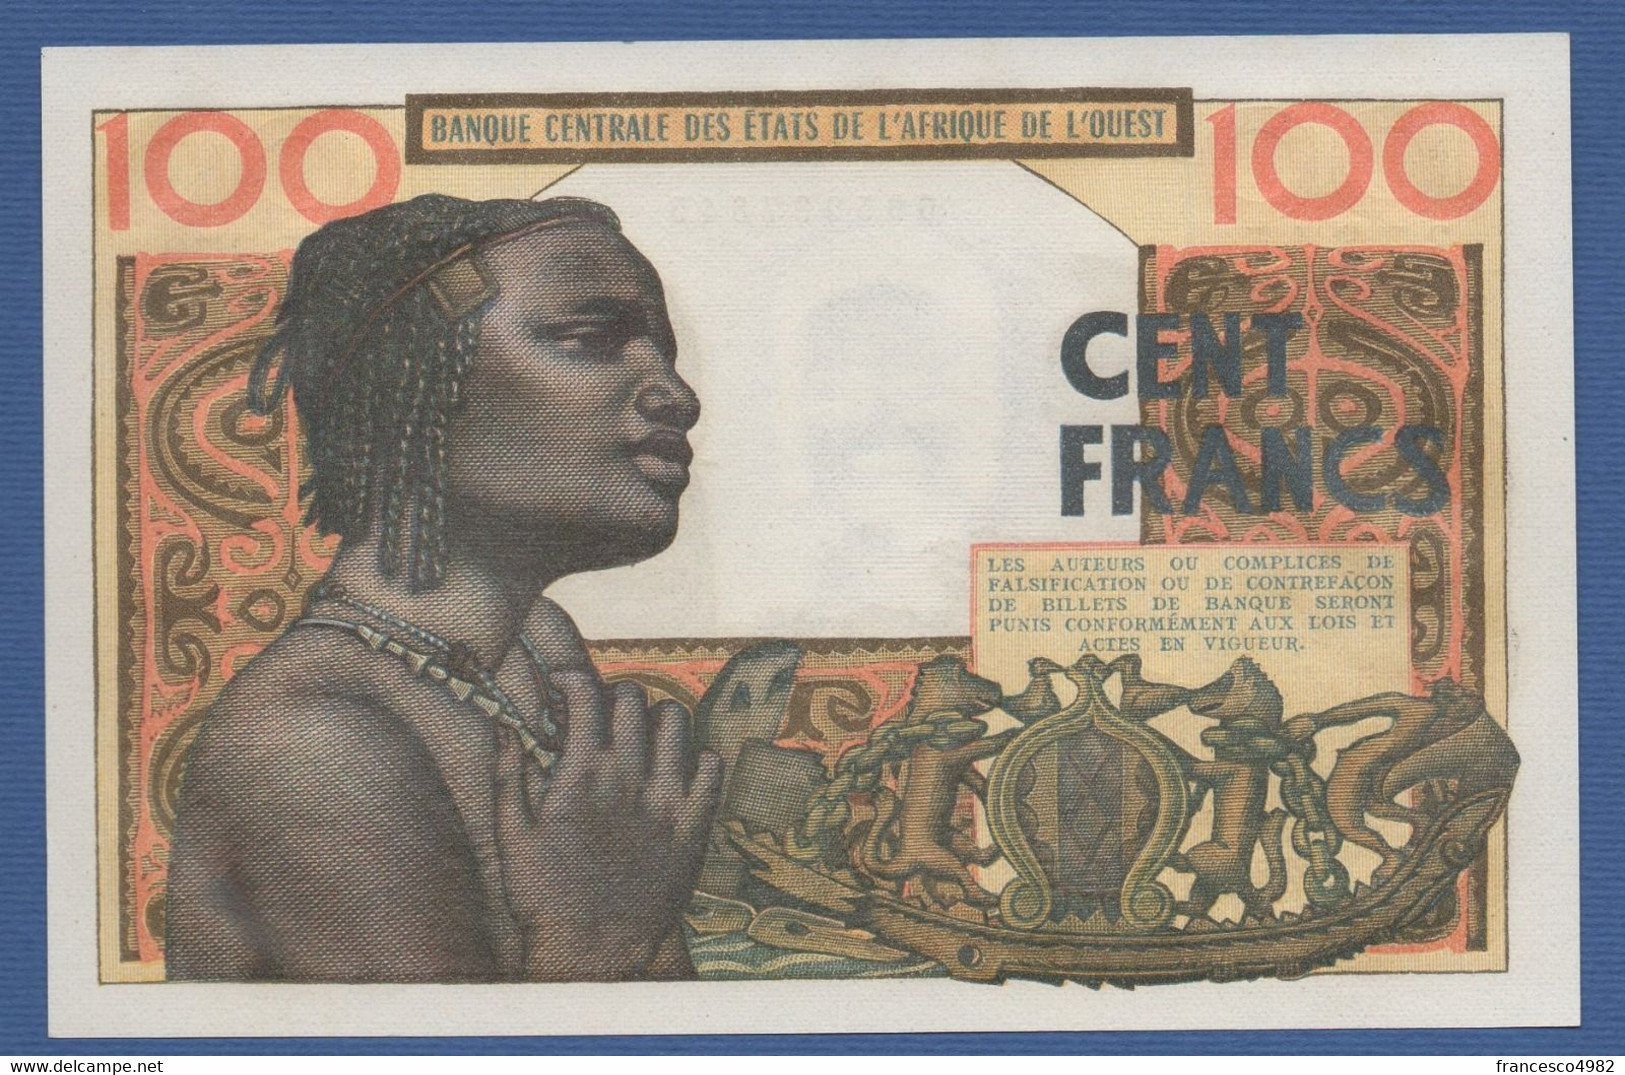 WEST AFRICAN STATES - P.2b – 100 Francs ND (1962)     UNC    Serie K.279 - West-Afrikaanse Staten